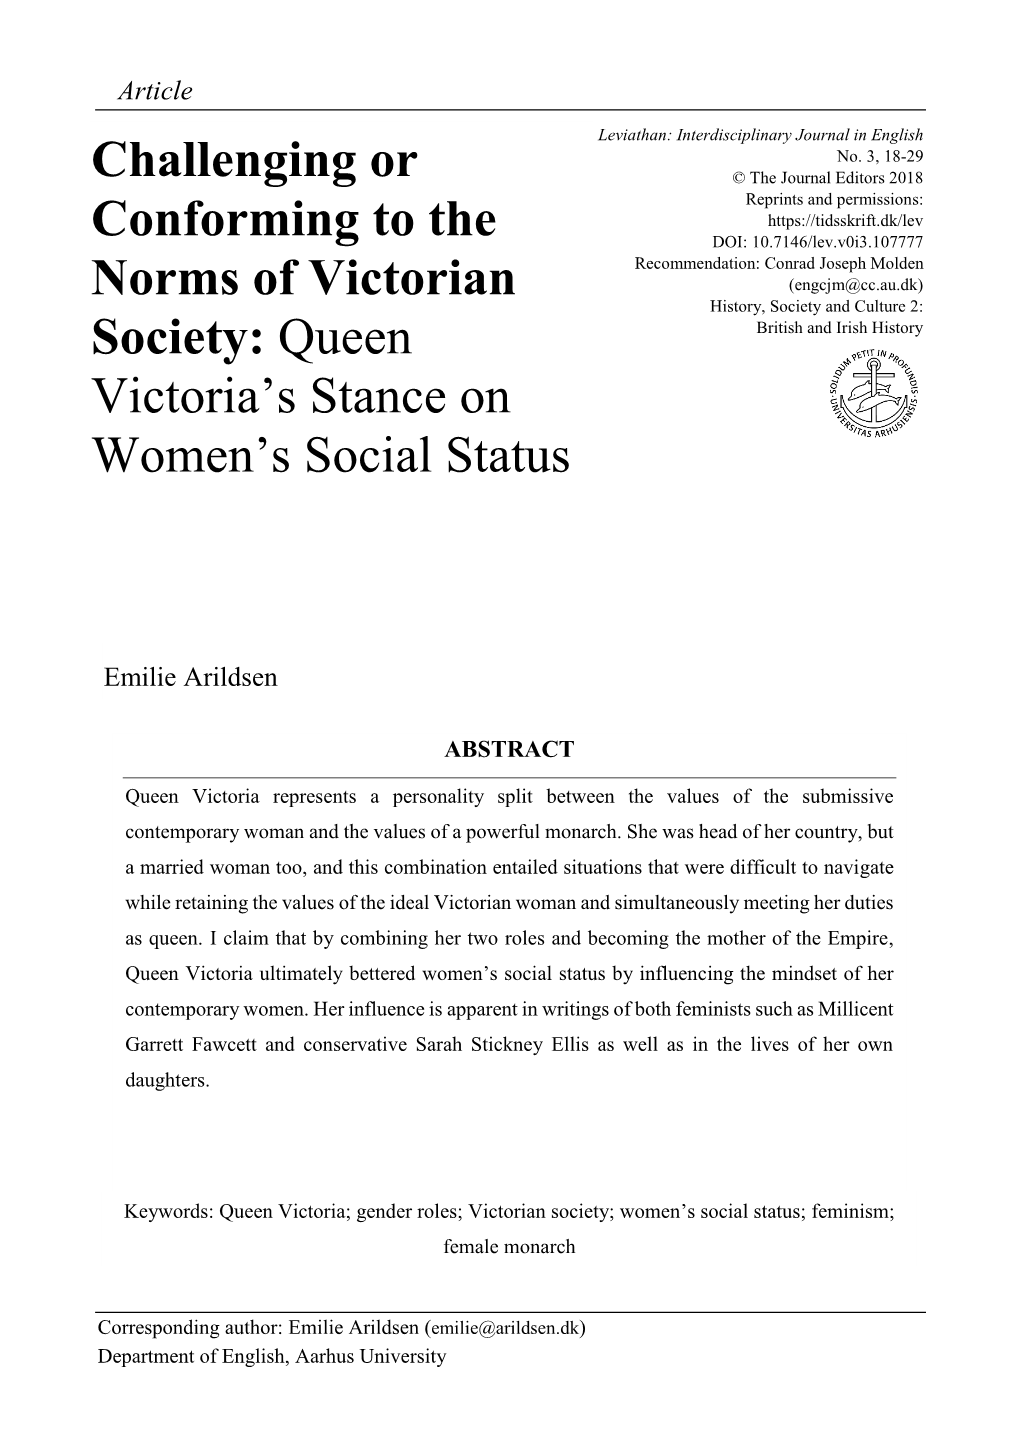 Challenging Or Conforming to the Norms of Victorian Society: Queen Victoria's Stance on Women's Social Status